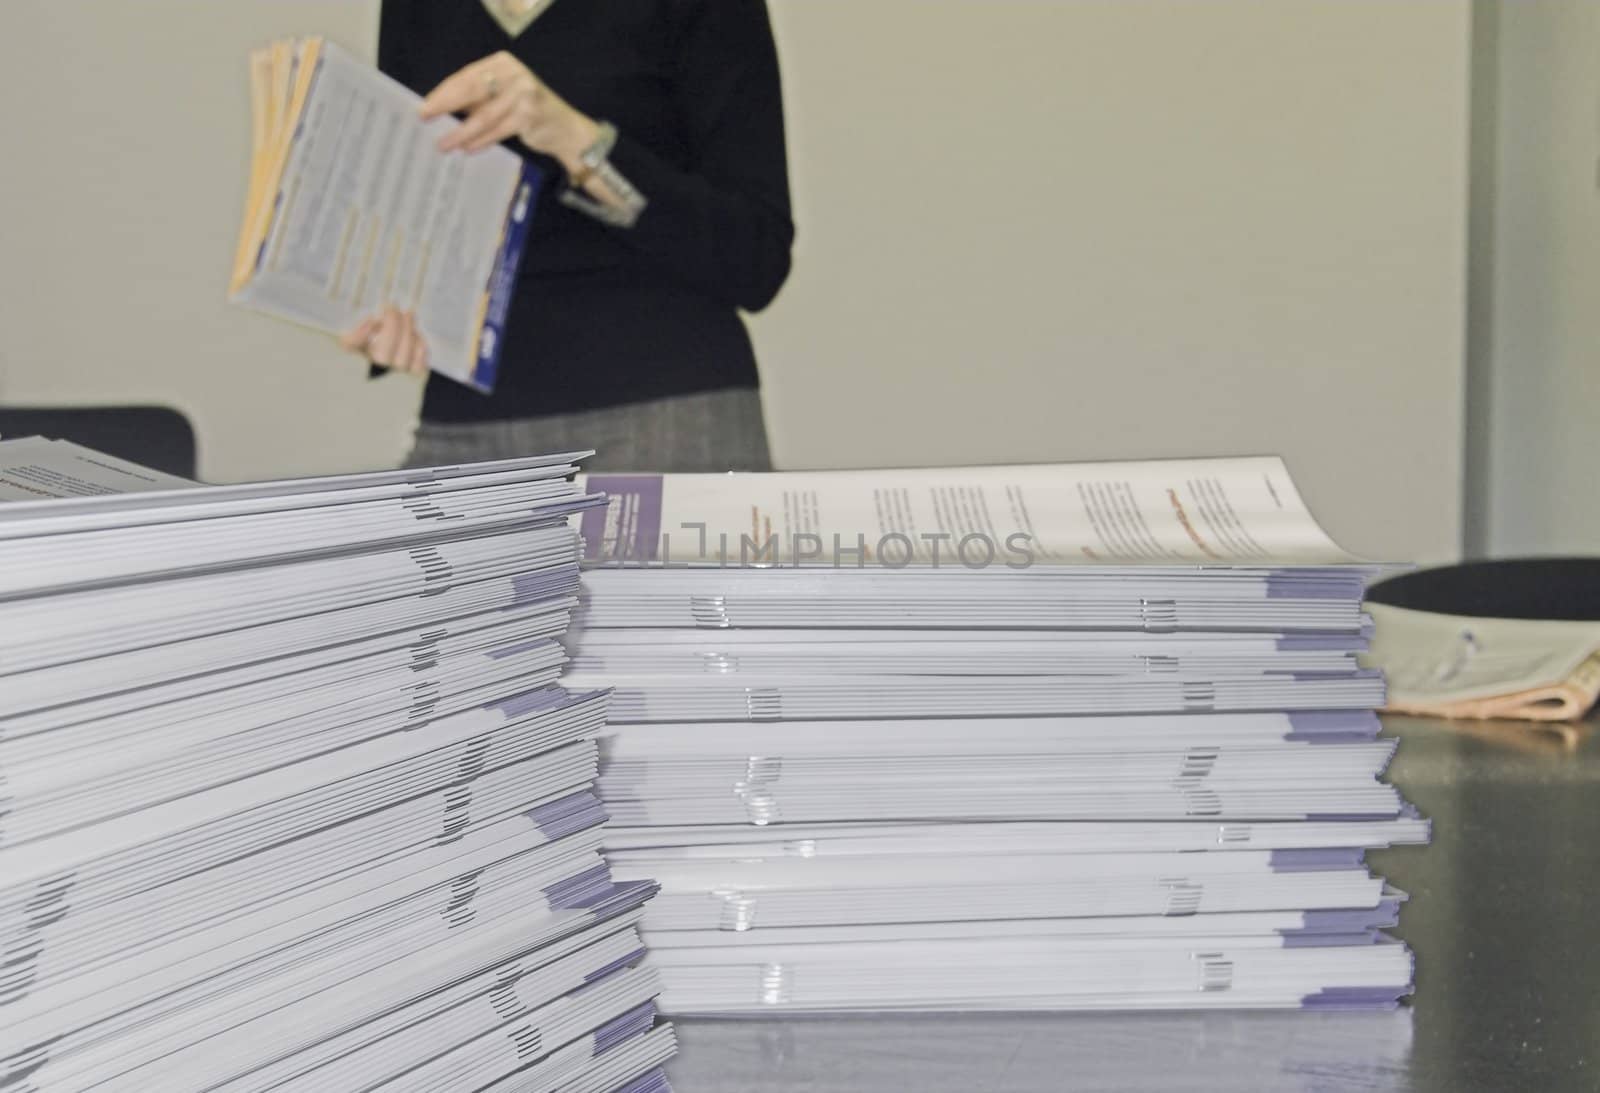 Piles of Handout Pamphlets and Woman in Background